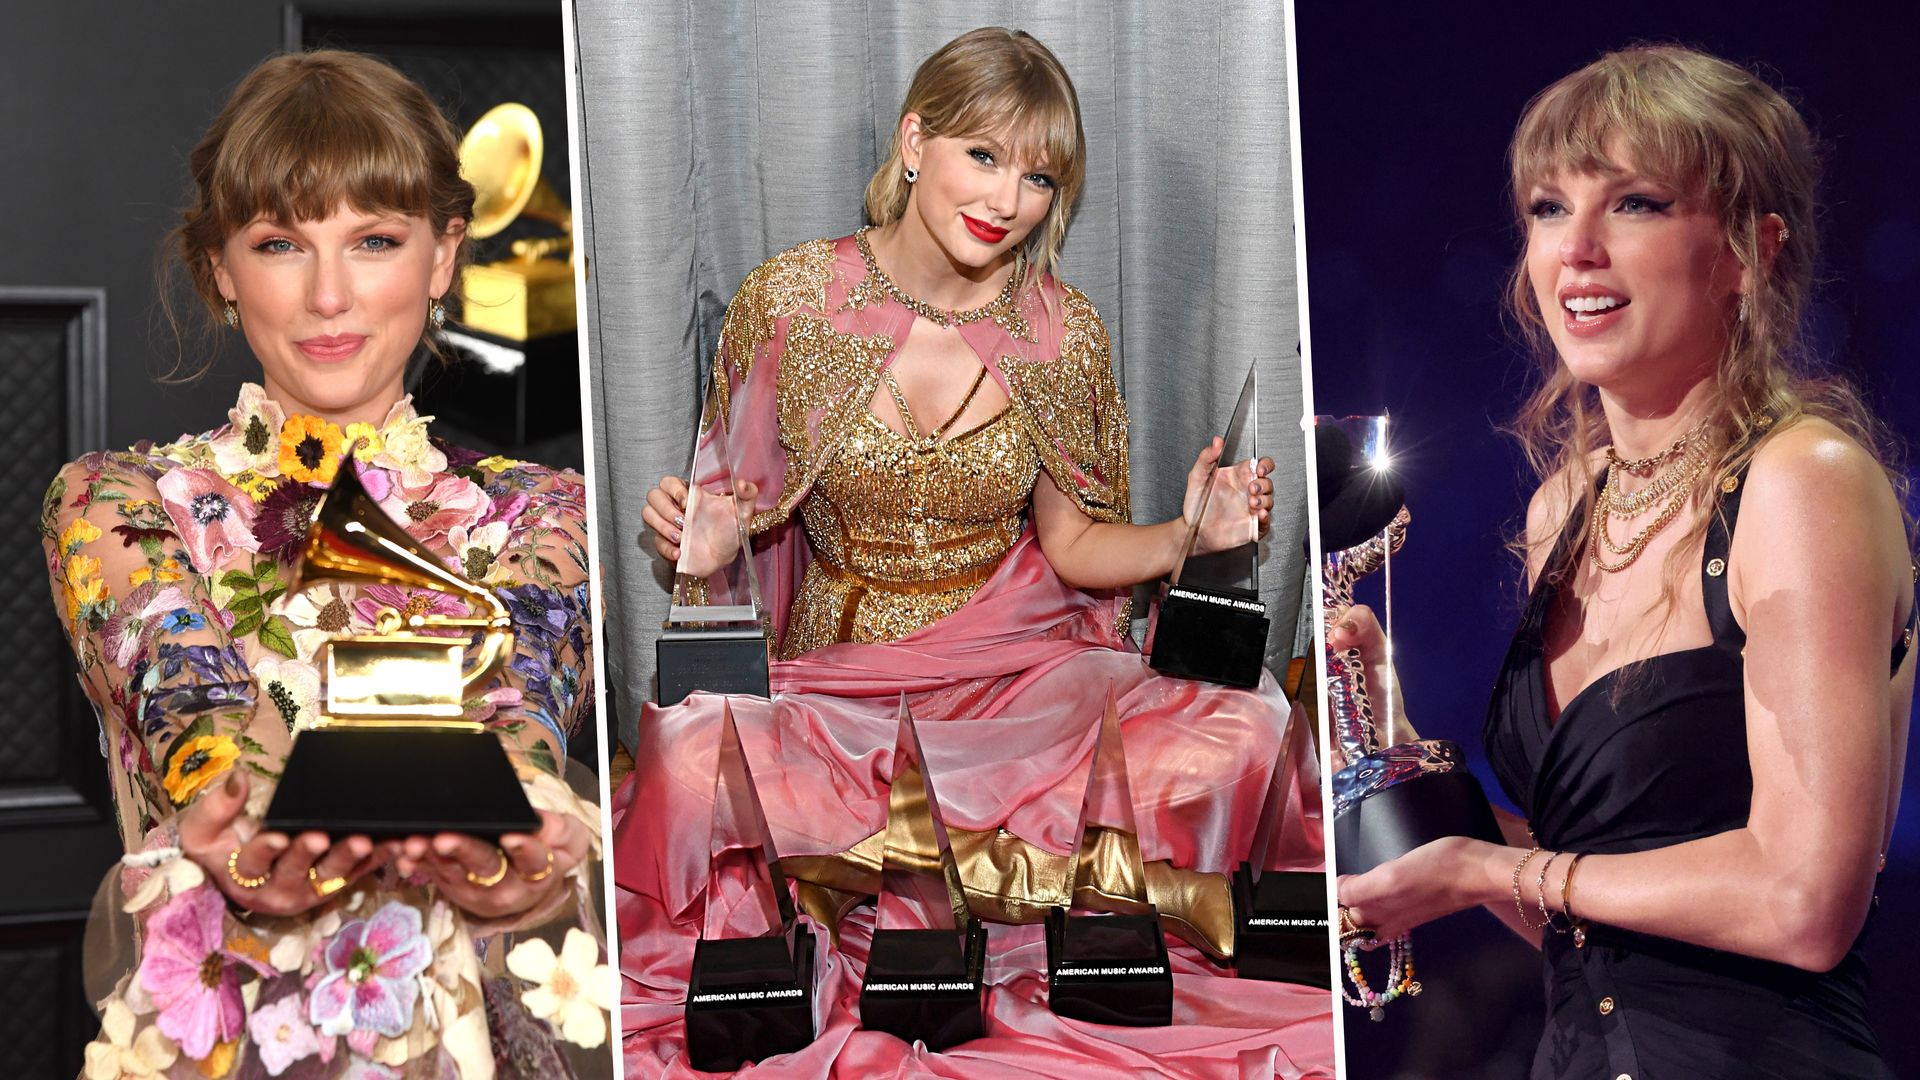 Taylor Swift makes history, honoured Time's Person of The Year for